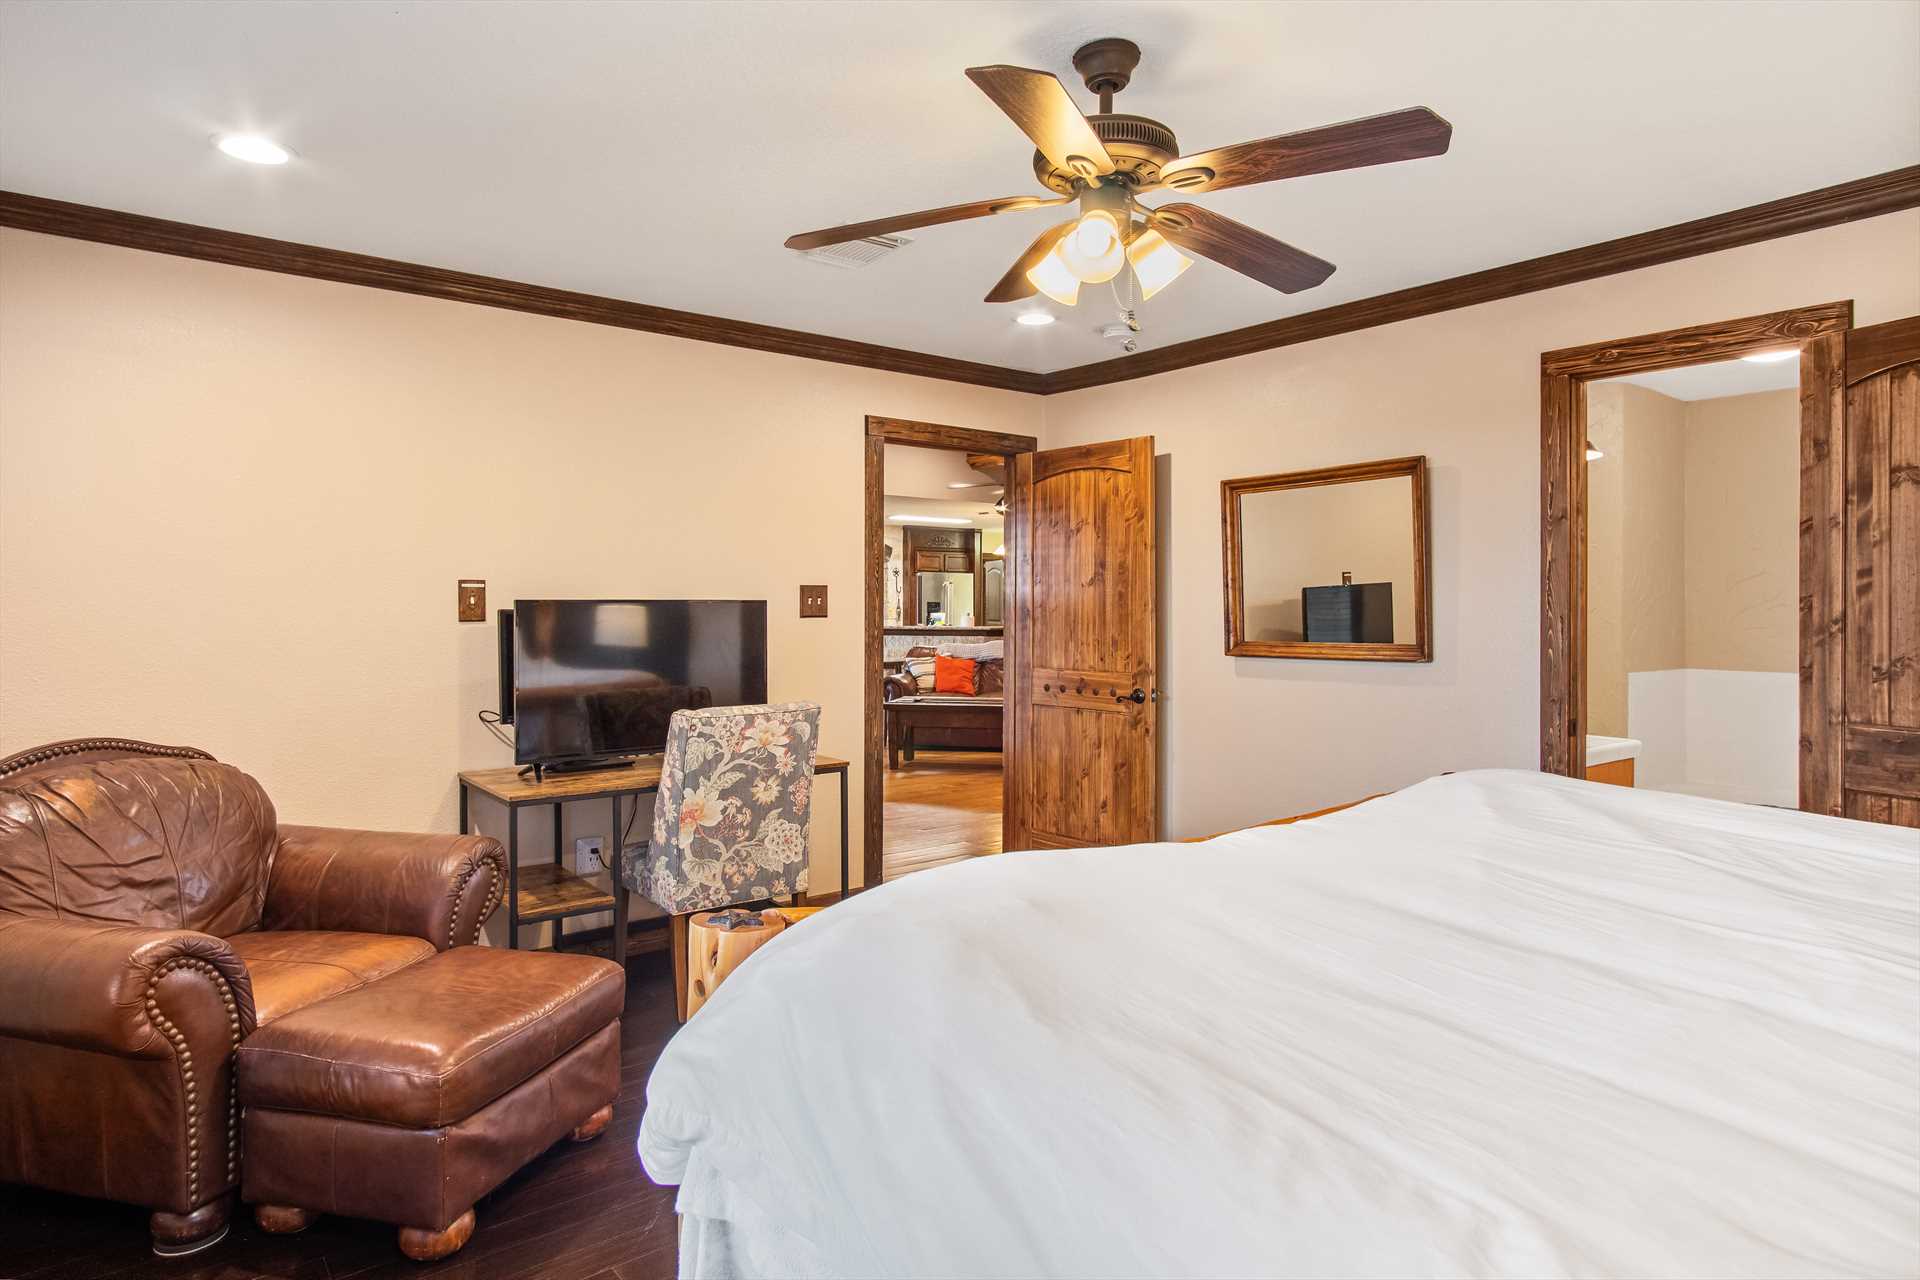                                                 Three people will find restful slumber in the master bedroom, with a king-sized bed and single fold-out bed.